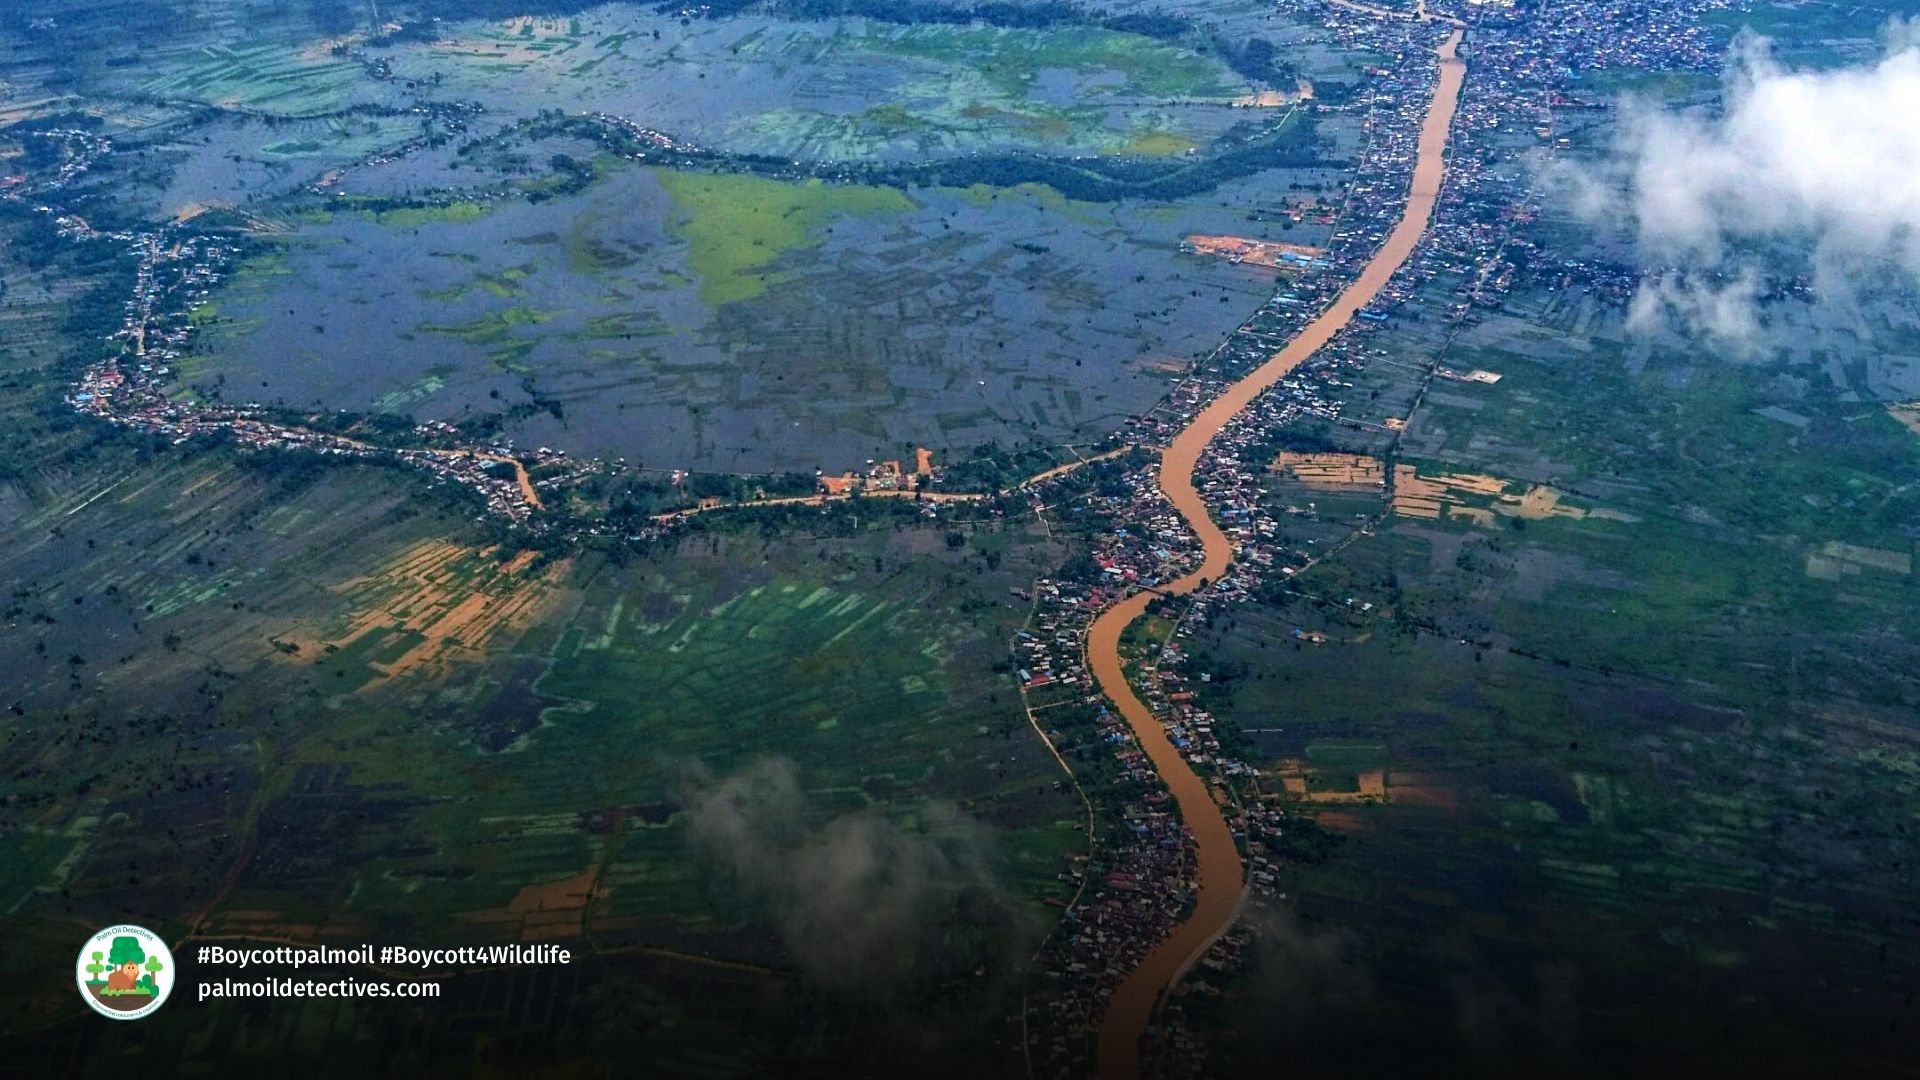 Barito River -The largest river in South Kalimantan Borneo by Aditya Perdana Getty Images